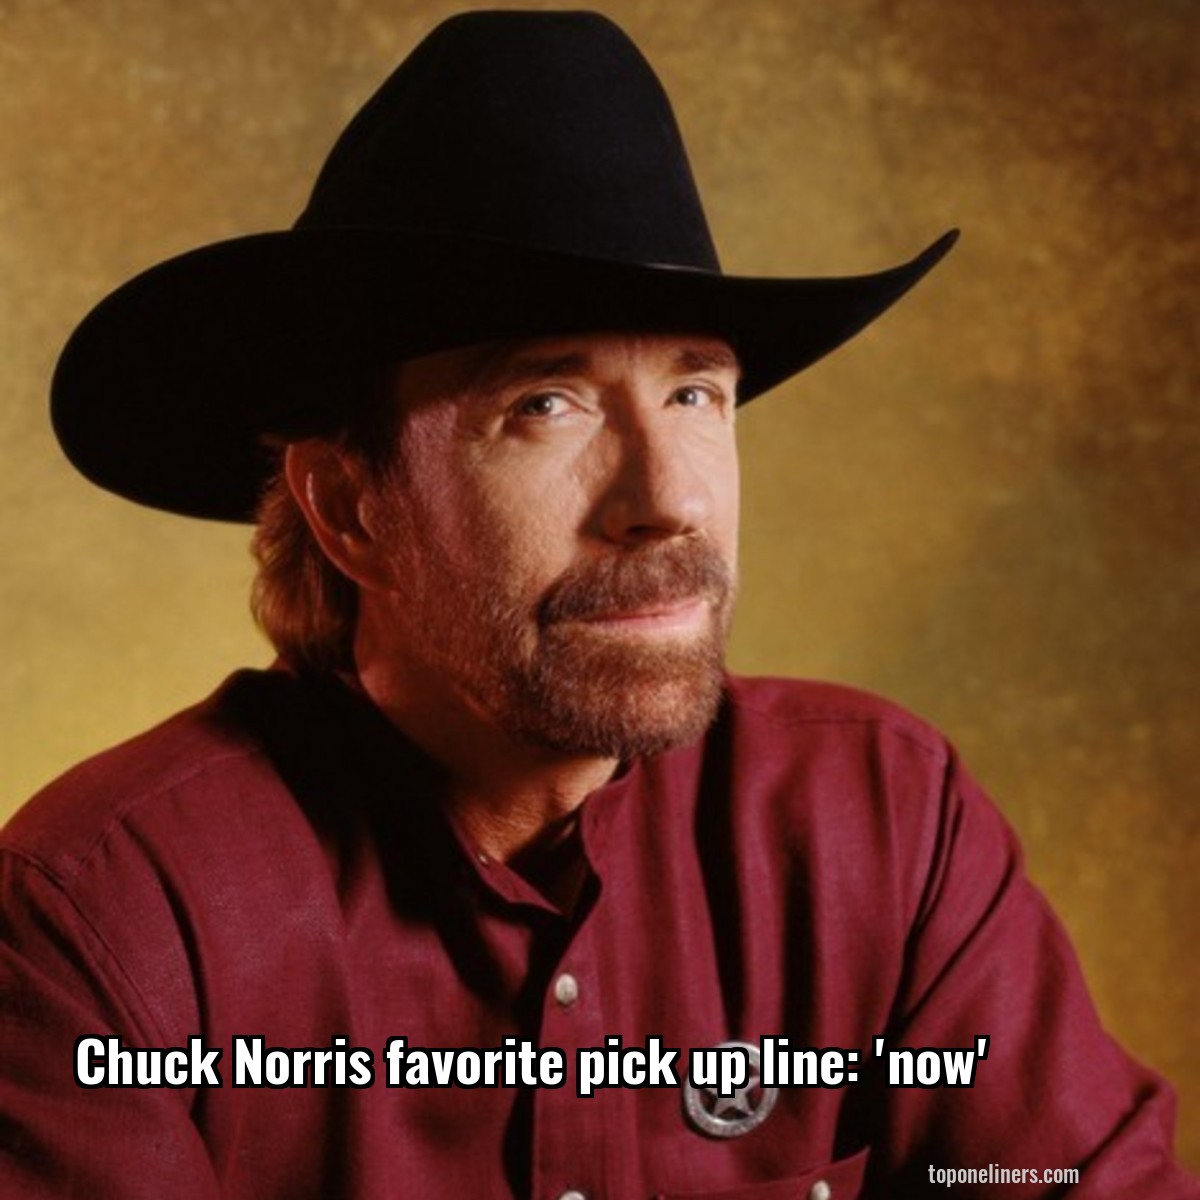 Chuck Norris favorite pick up line: 'now'